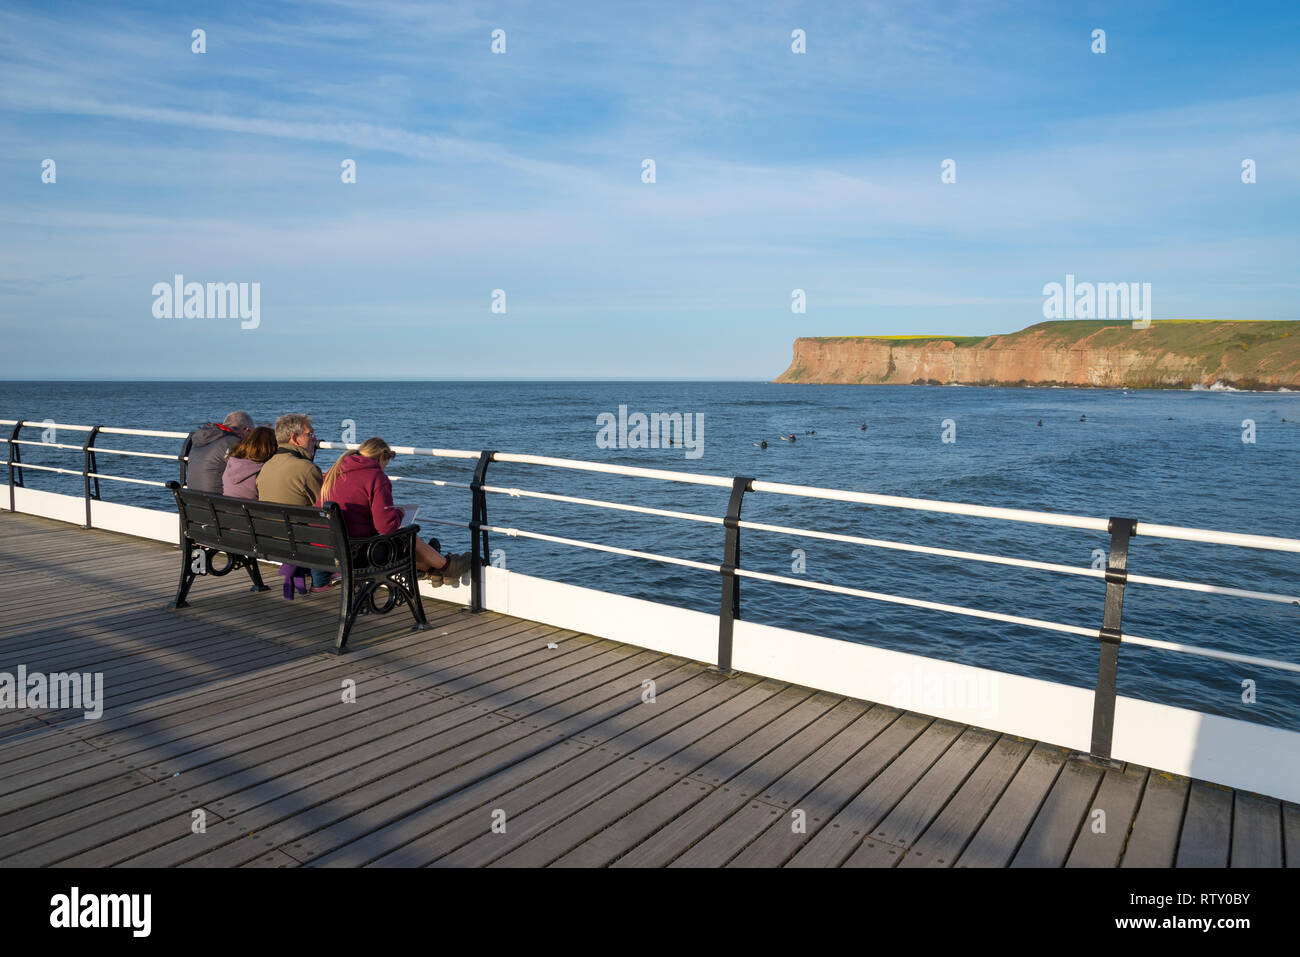 Family sat on bench on the pier at Saltburn-by-the-sea, North Yorkshire, England. Enjoying the view on a sunny spring afternoon. Stock Photo